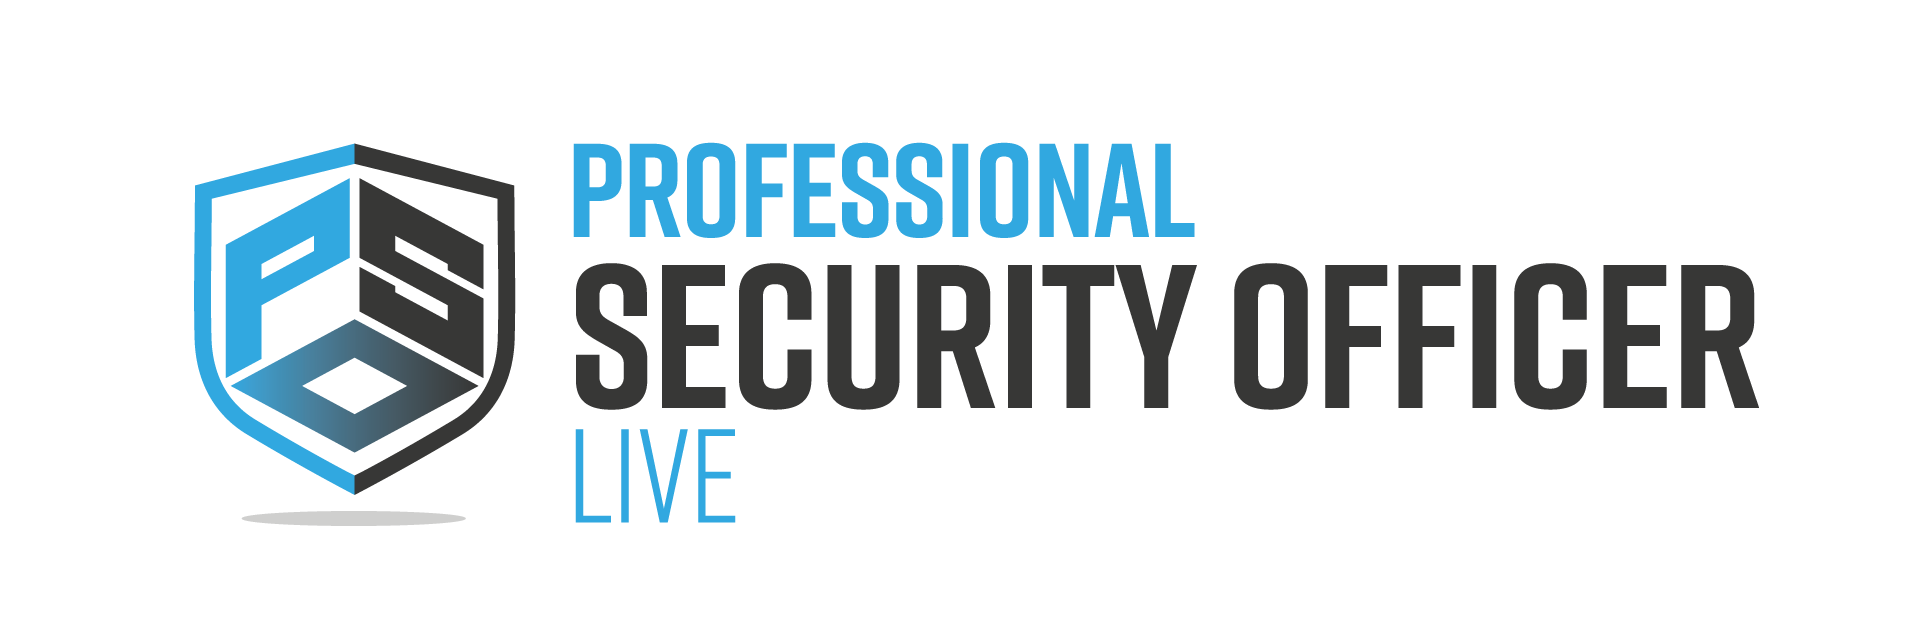 Professional Security Officer Live